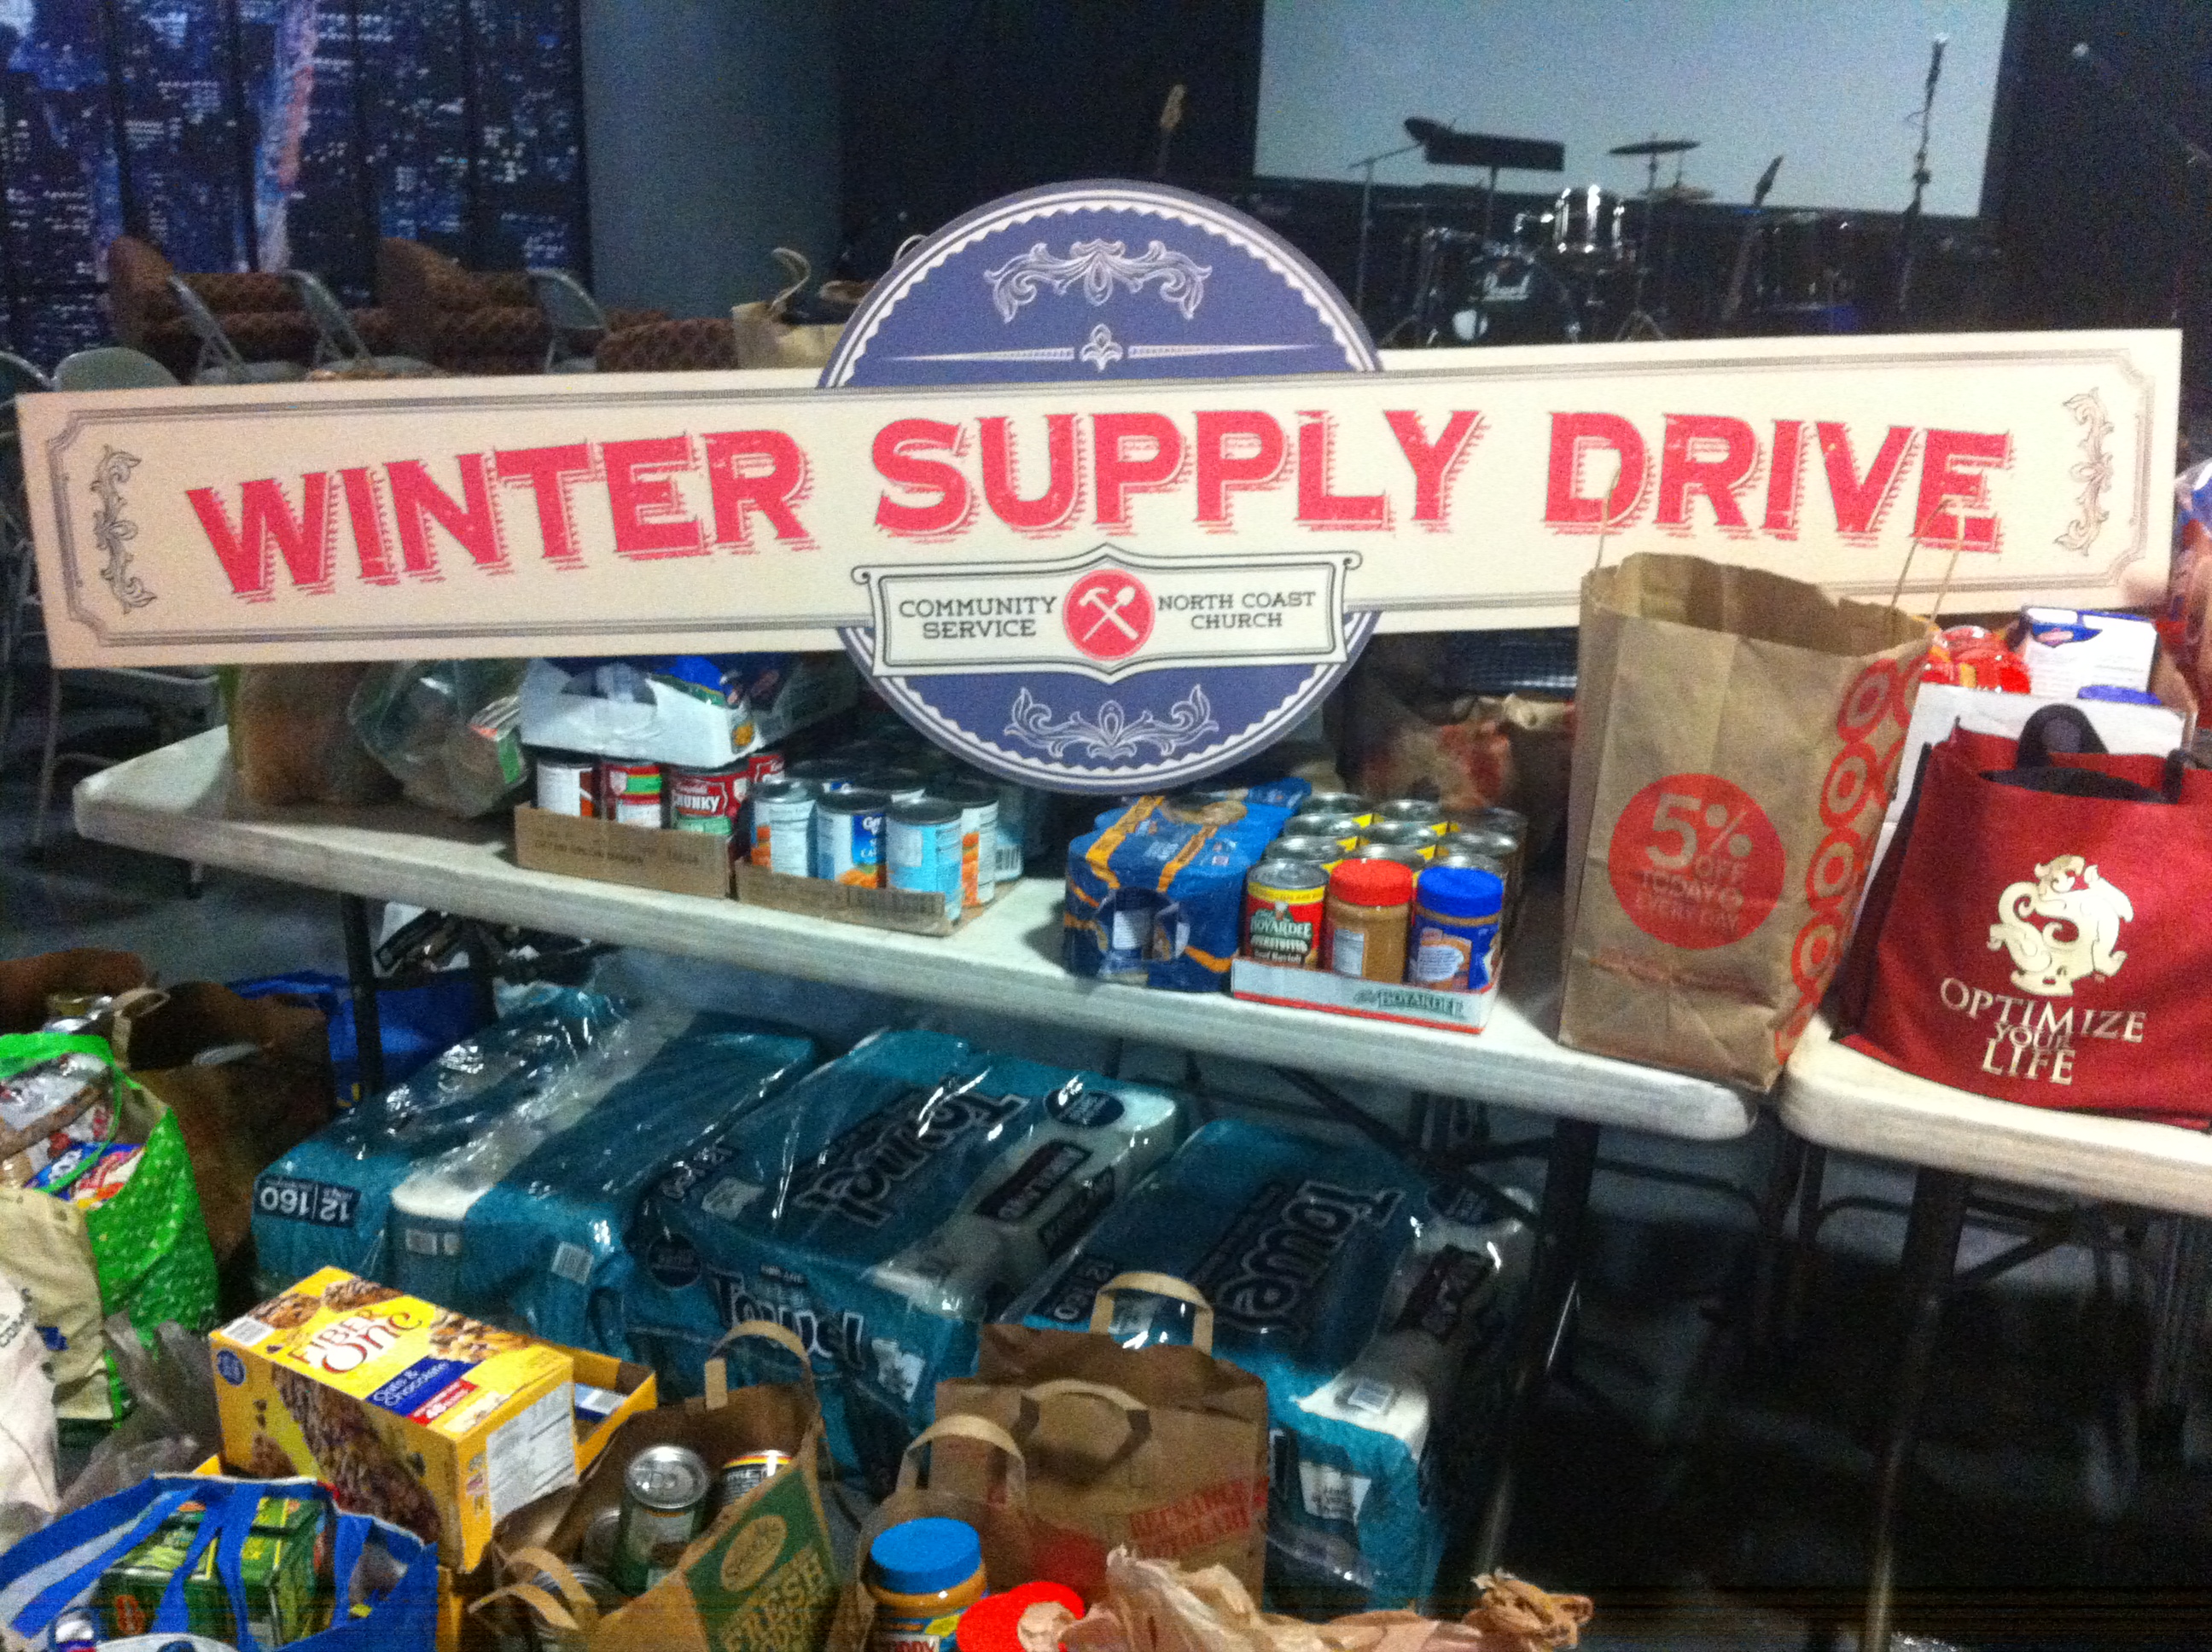 Winter Supply Drive - Sorting Day - Monday Oct 8